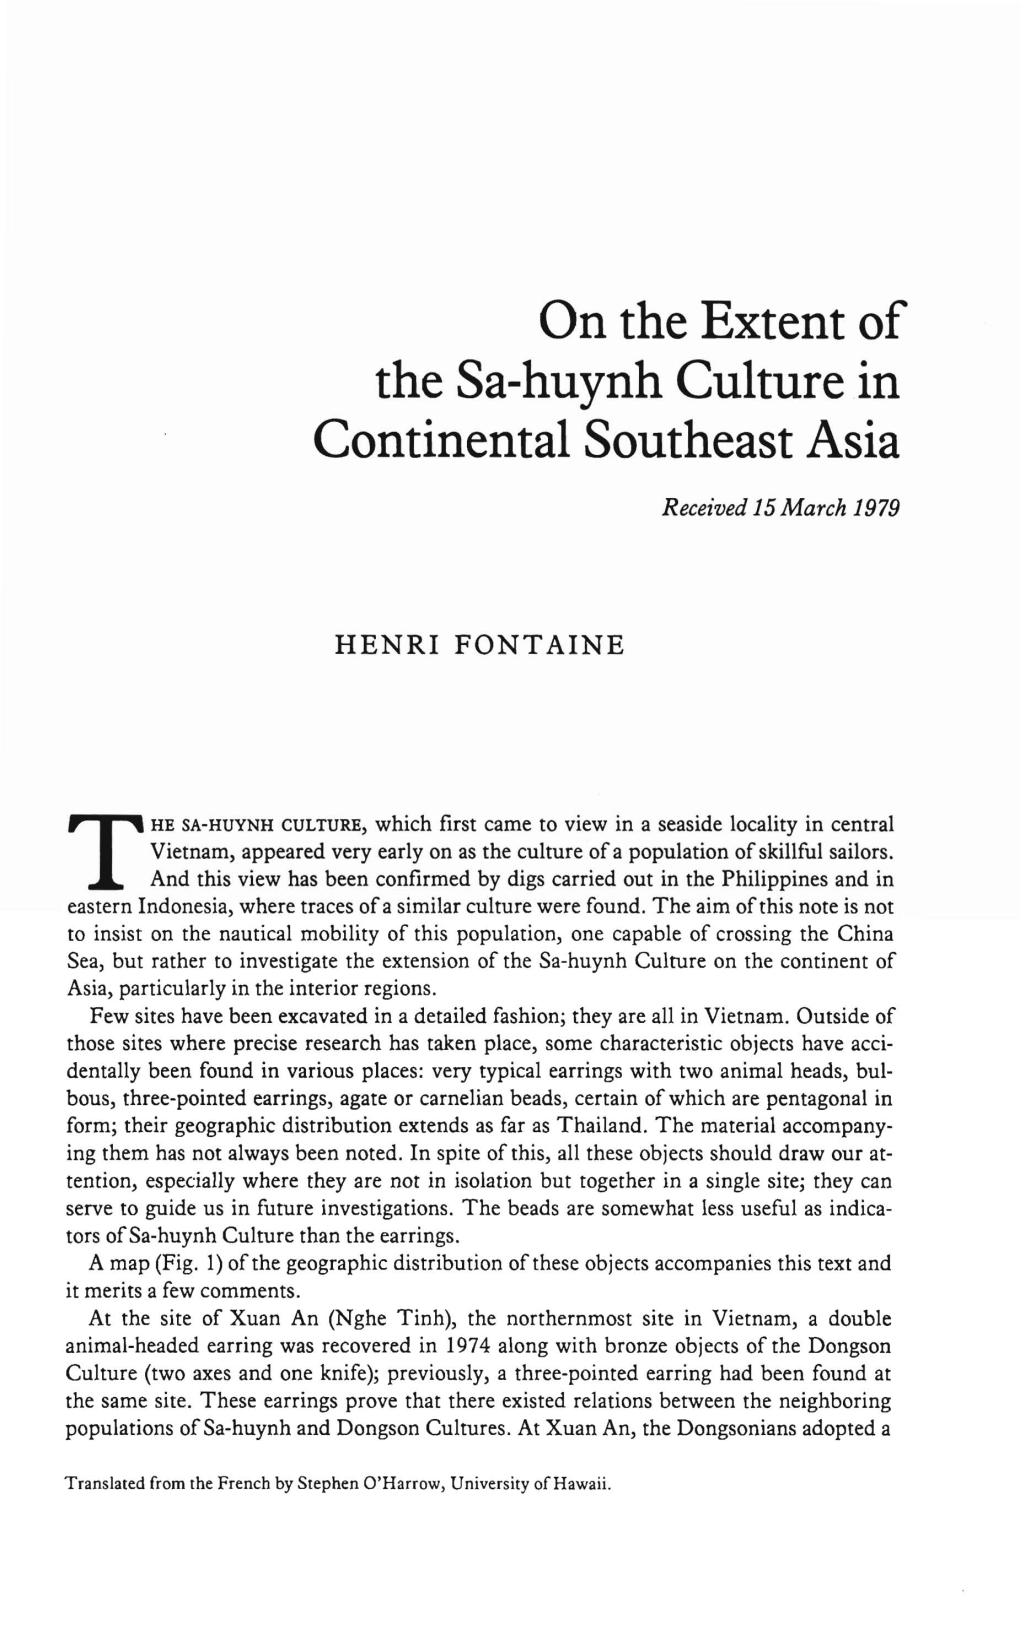 On the Extent of the Sa-Huynh Culture in Continental Southeast Asia